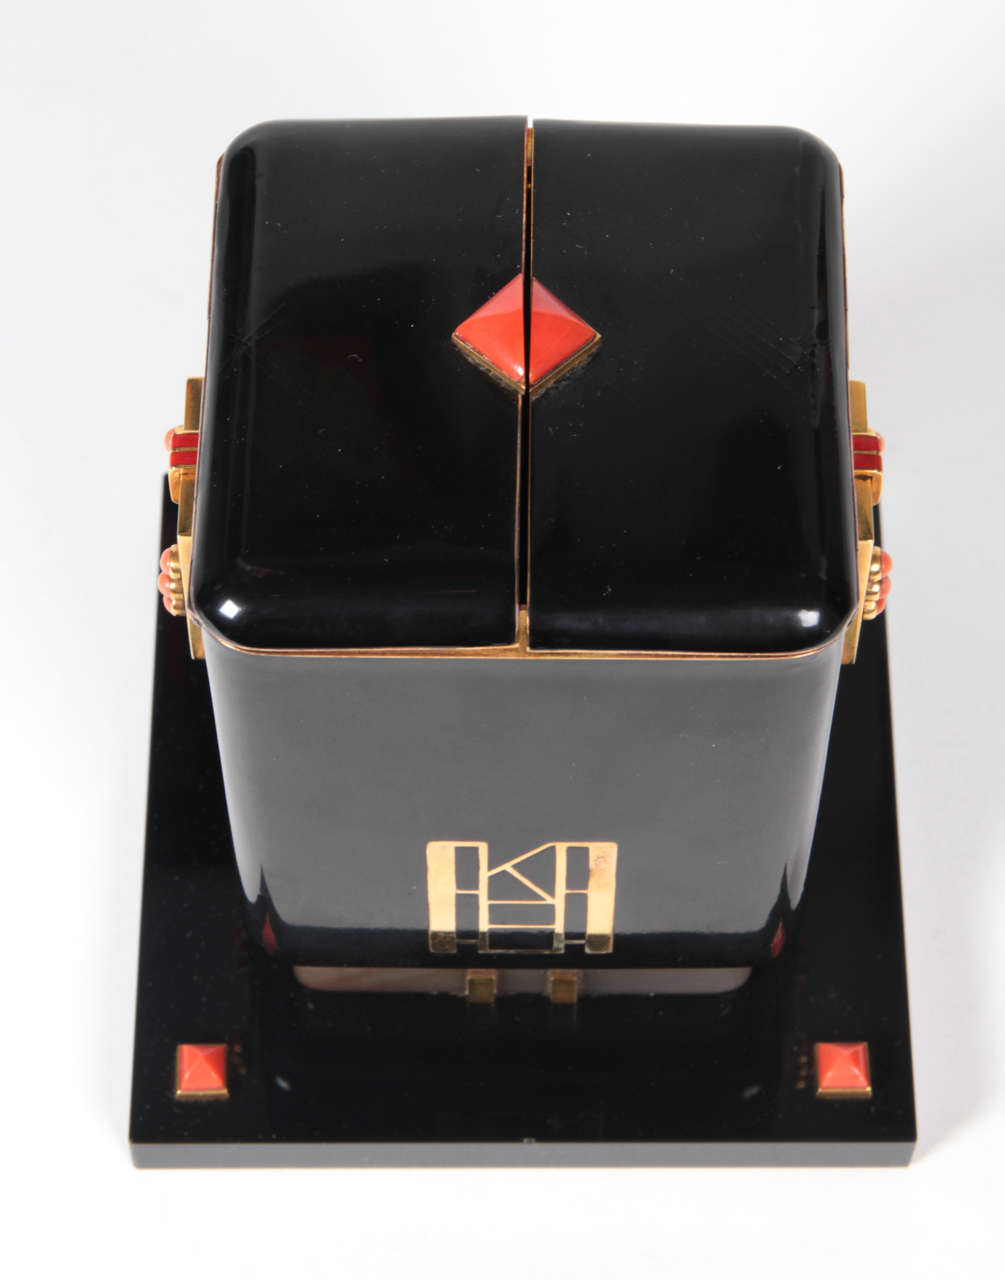 Maison Ostertag Important French Art Deco Jewel Mounted Covered Box  c.1925 For Sale 3